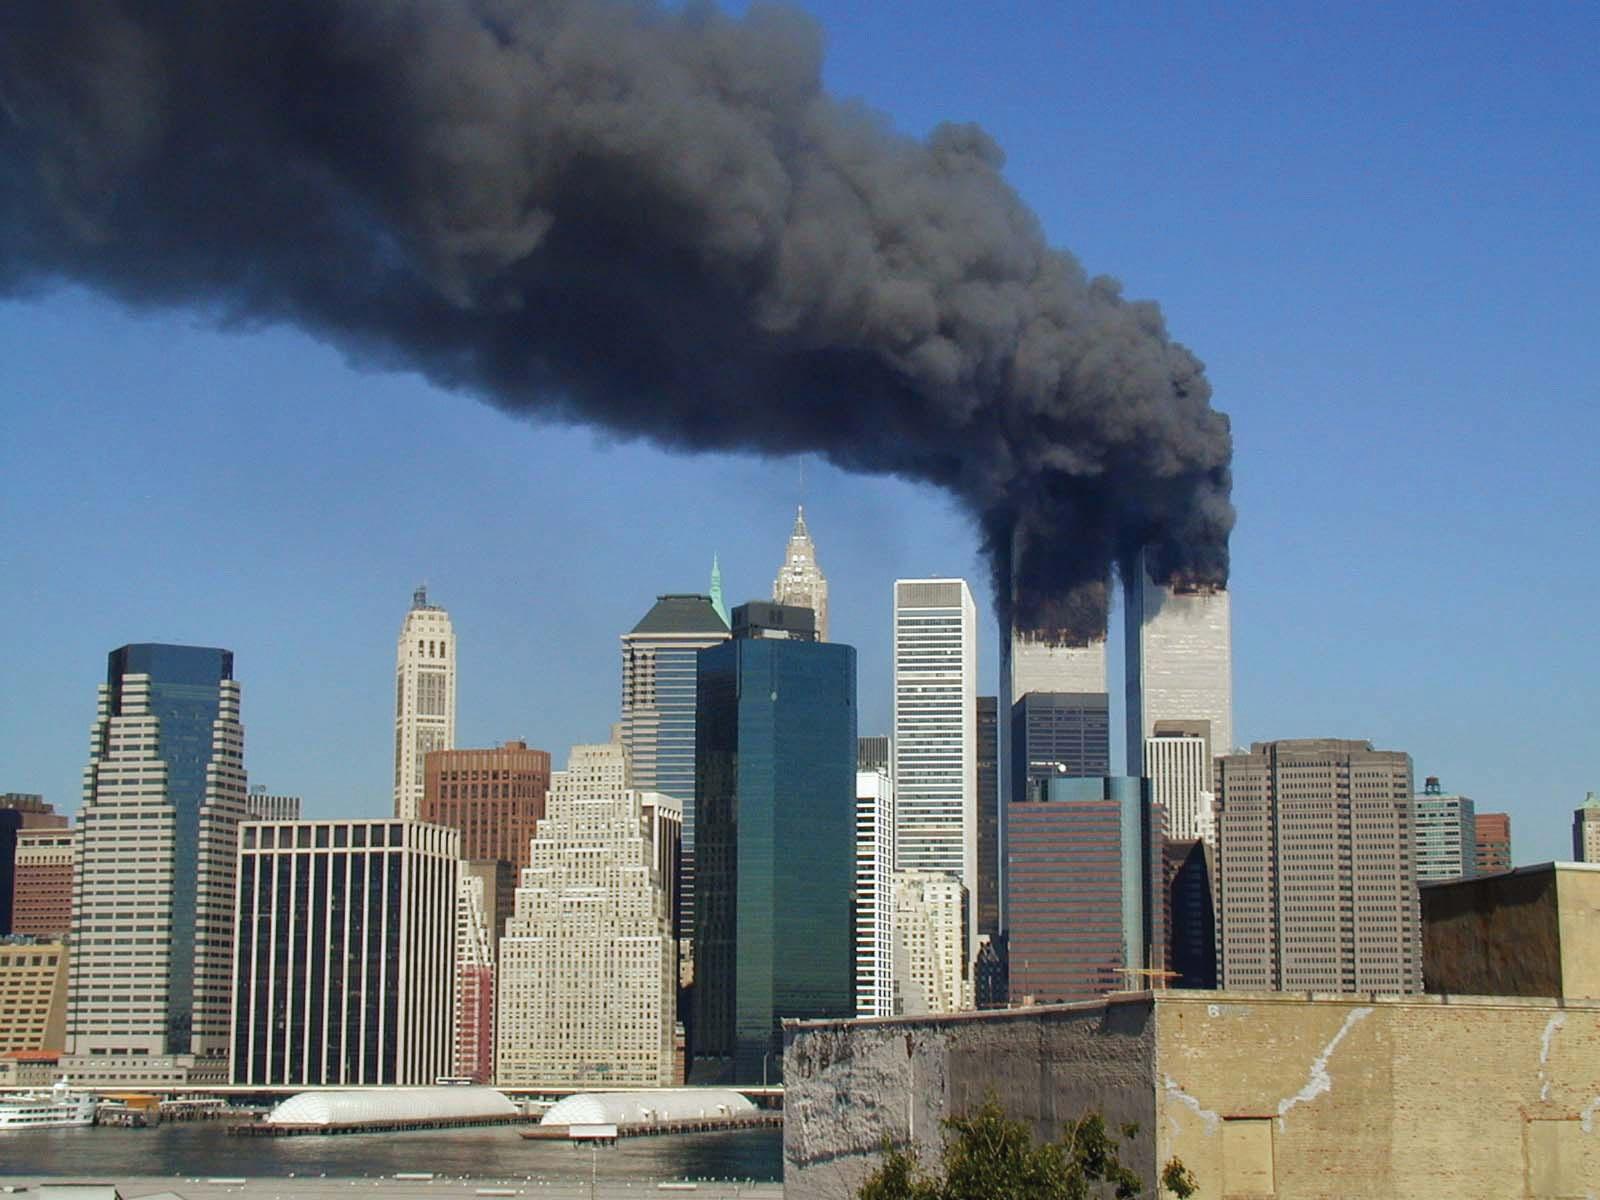 New York city skyline; two buildings have massive plumes of black smoke rising from them.